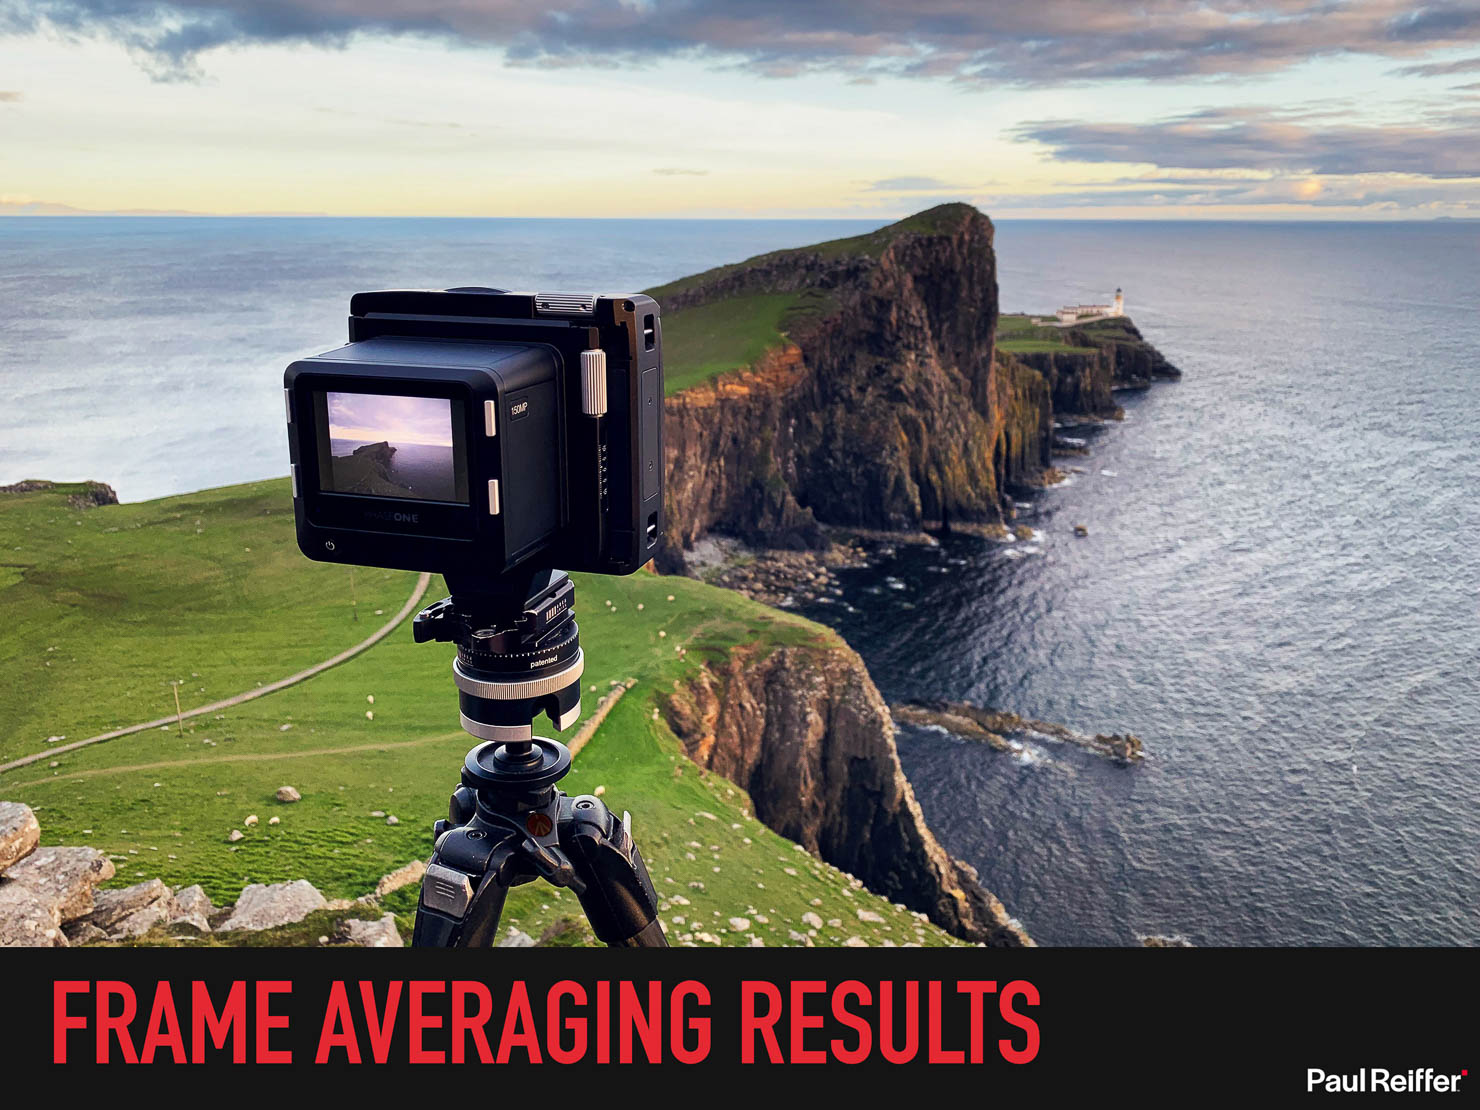 Frame Averaging Complete Guide Paul Reiffer Phase One Presentation Automated Long Exposure Afa How To 037 Bts Scotland